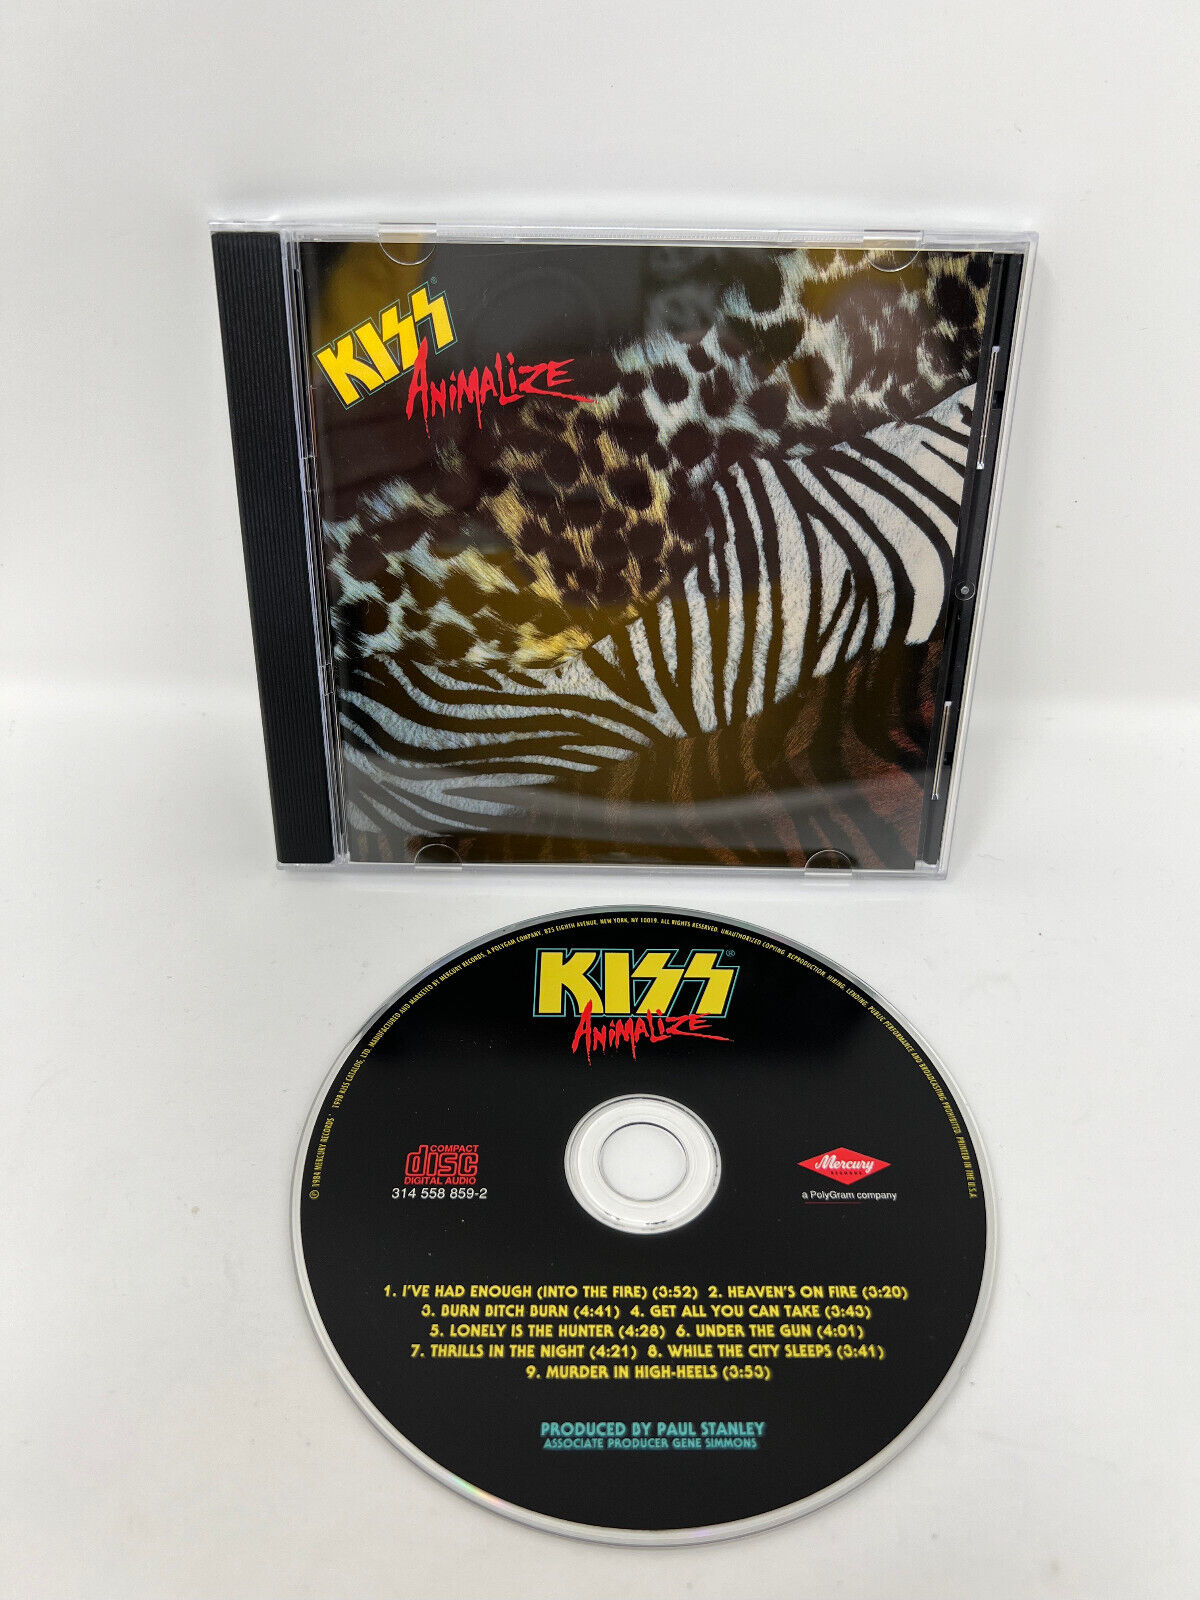 KISS Animalize THE REMASTERS  (CD, 1998 KISS CATALOG) Clean Resurfaced disc